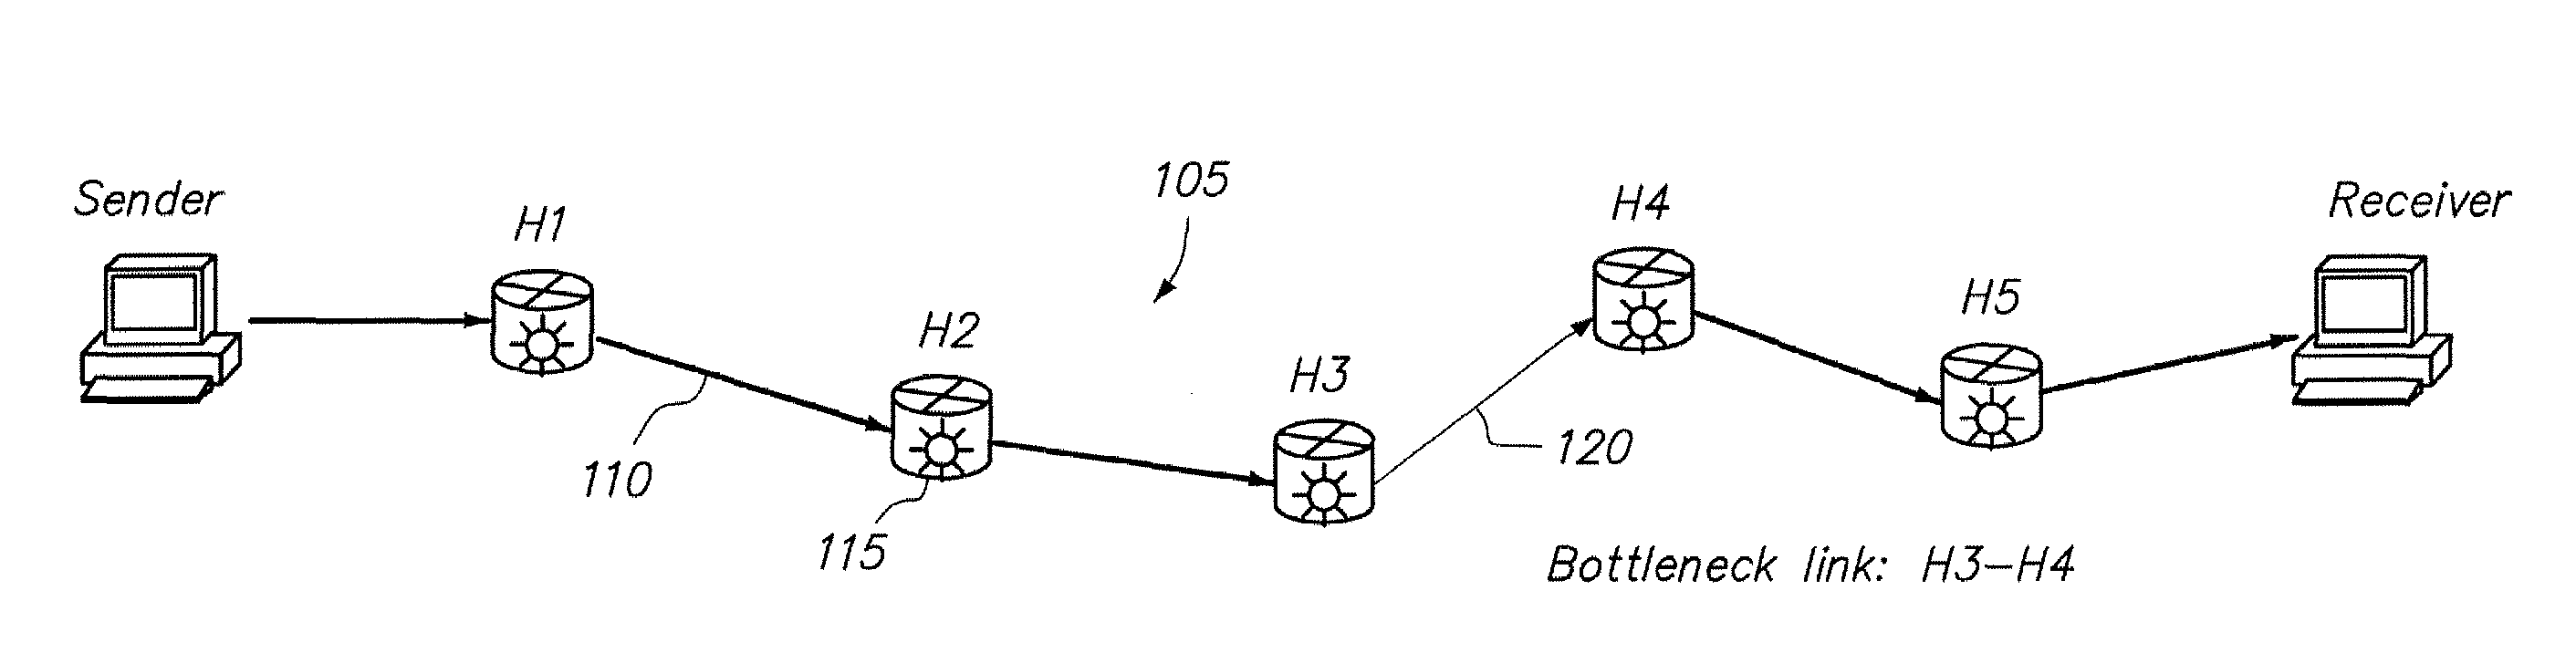 Systems and methods for computing data transmission characteristics of a network path based on single-ended measurements